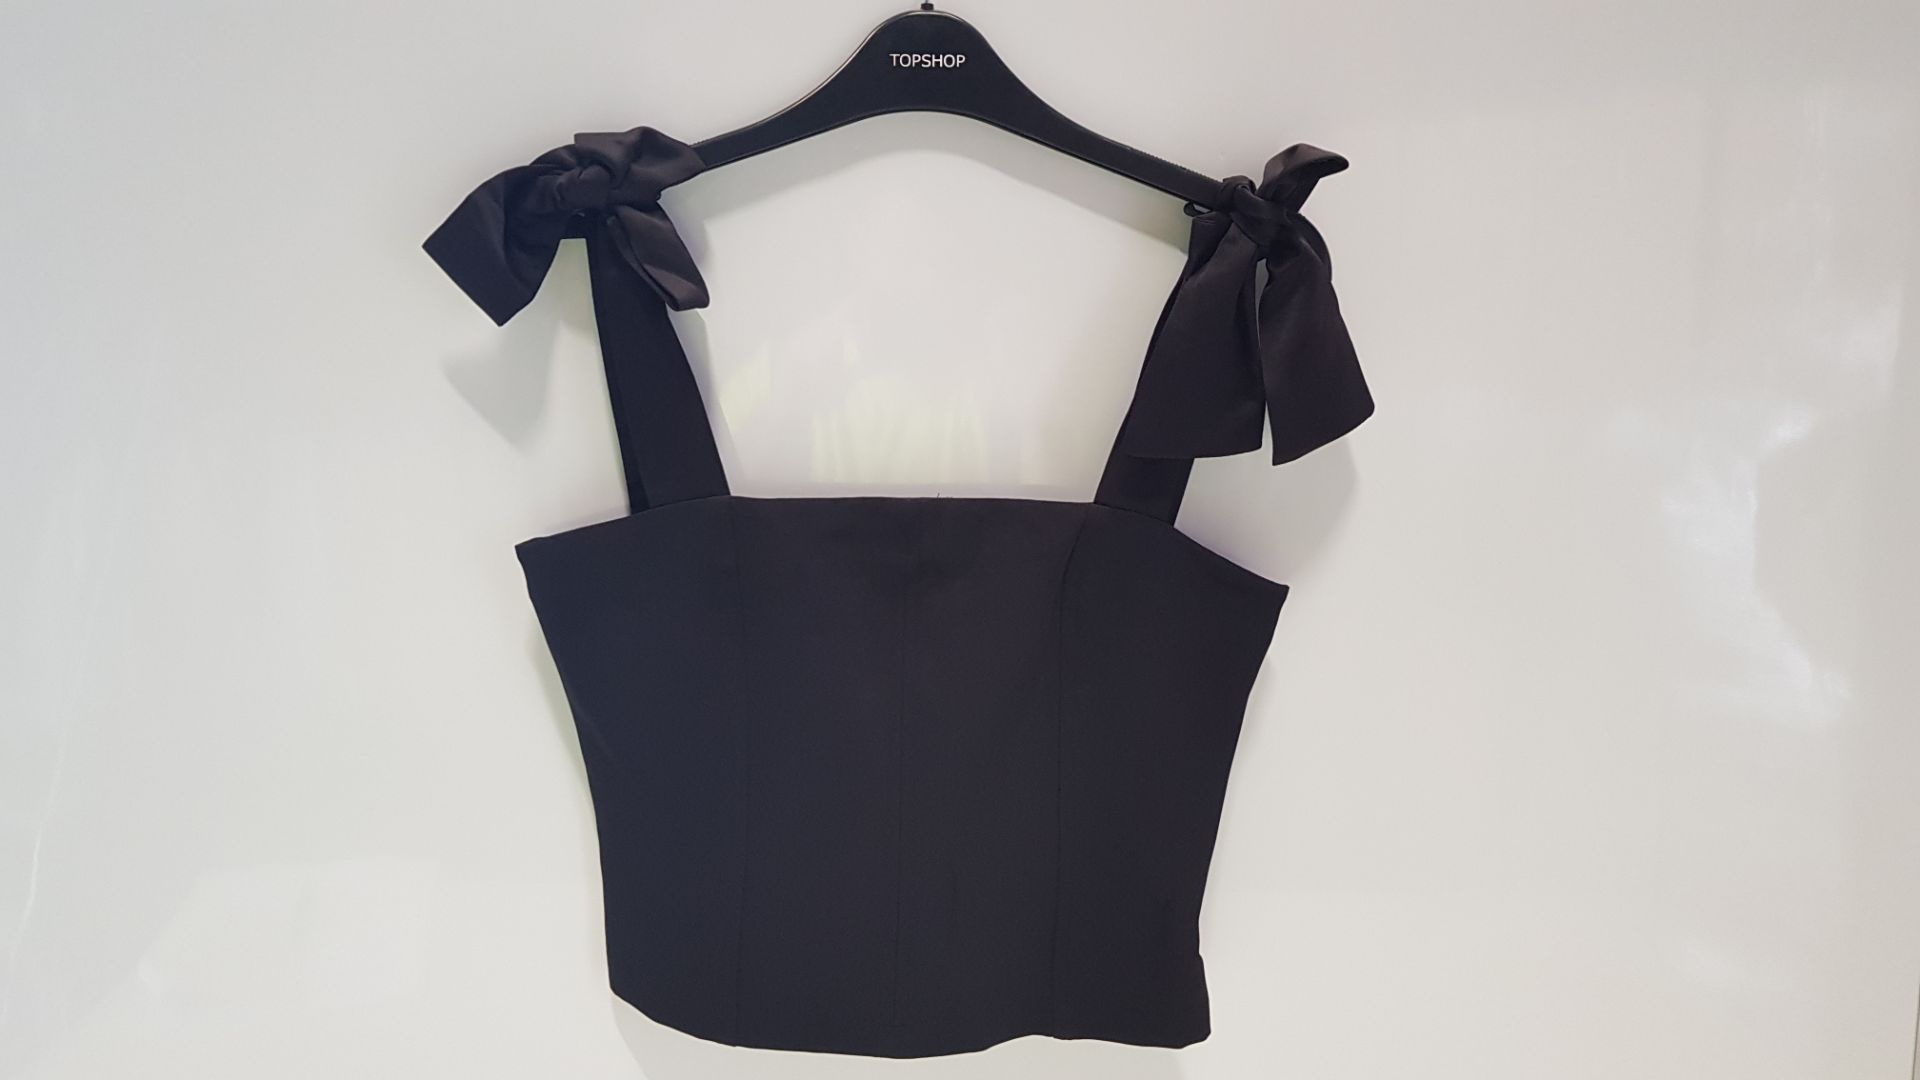 35 X BRAND NEW TOPSHOP ZIPPED HALF TOPS IN BLACK UK SIZE 8 AND 10 RRP £29.00 (TOTAL RRP £1015.00)